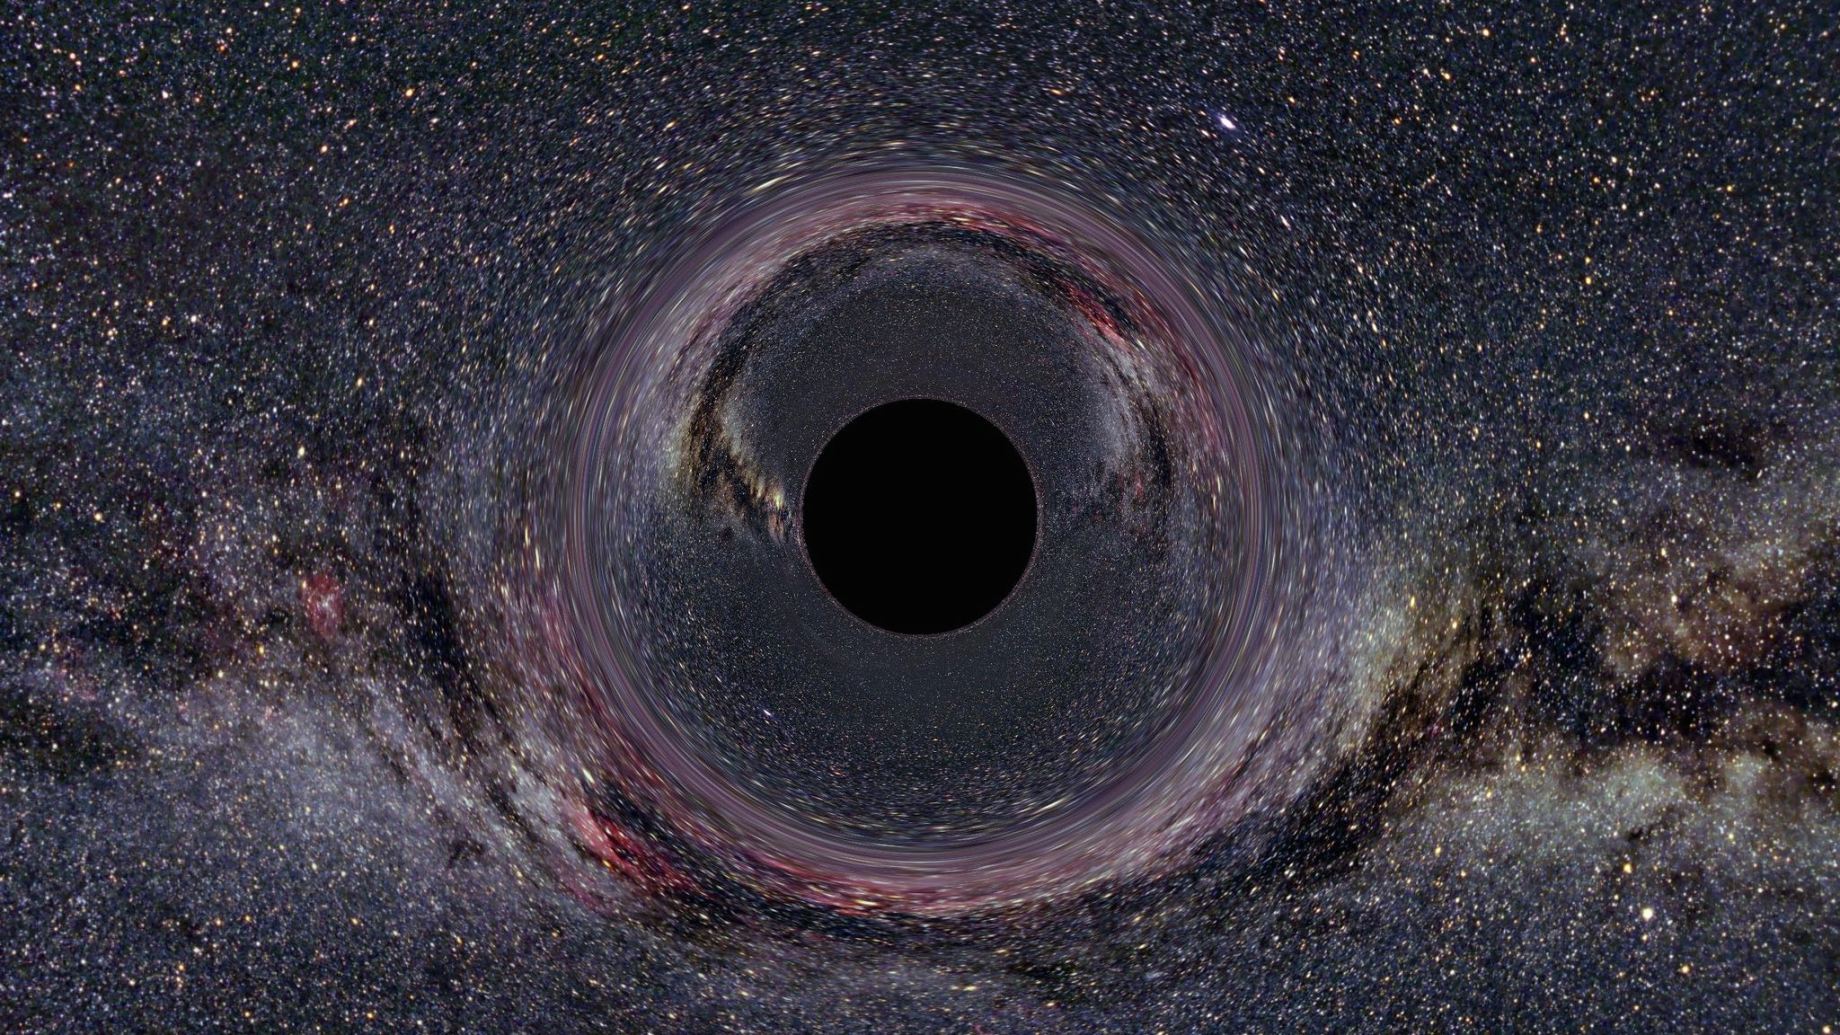 A simulated Black Hole of ten solar masses as seen from a distance of 600km with the Milky Way in the background (horizontal camera opening angle: 90°). Ute Kraus/Wikimedia Commons (CC BY-SA). https://commons.wikimedia.org/wiki/File:Black_Hole_Milkyway.jpg